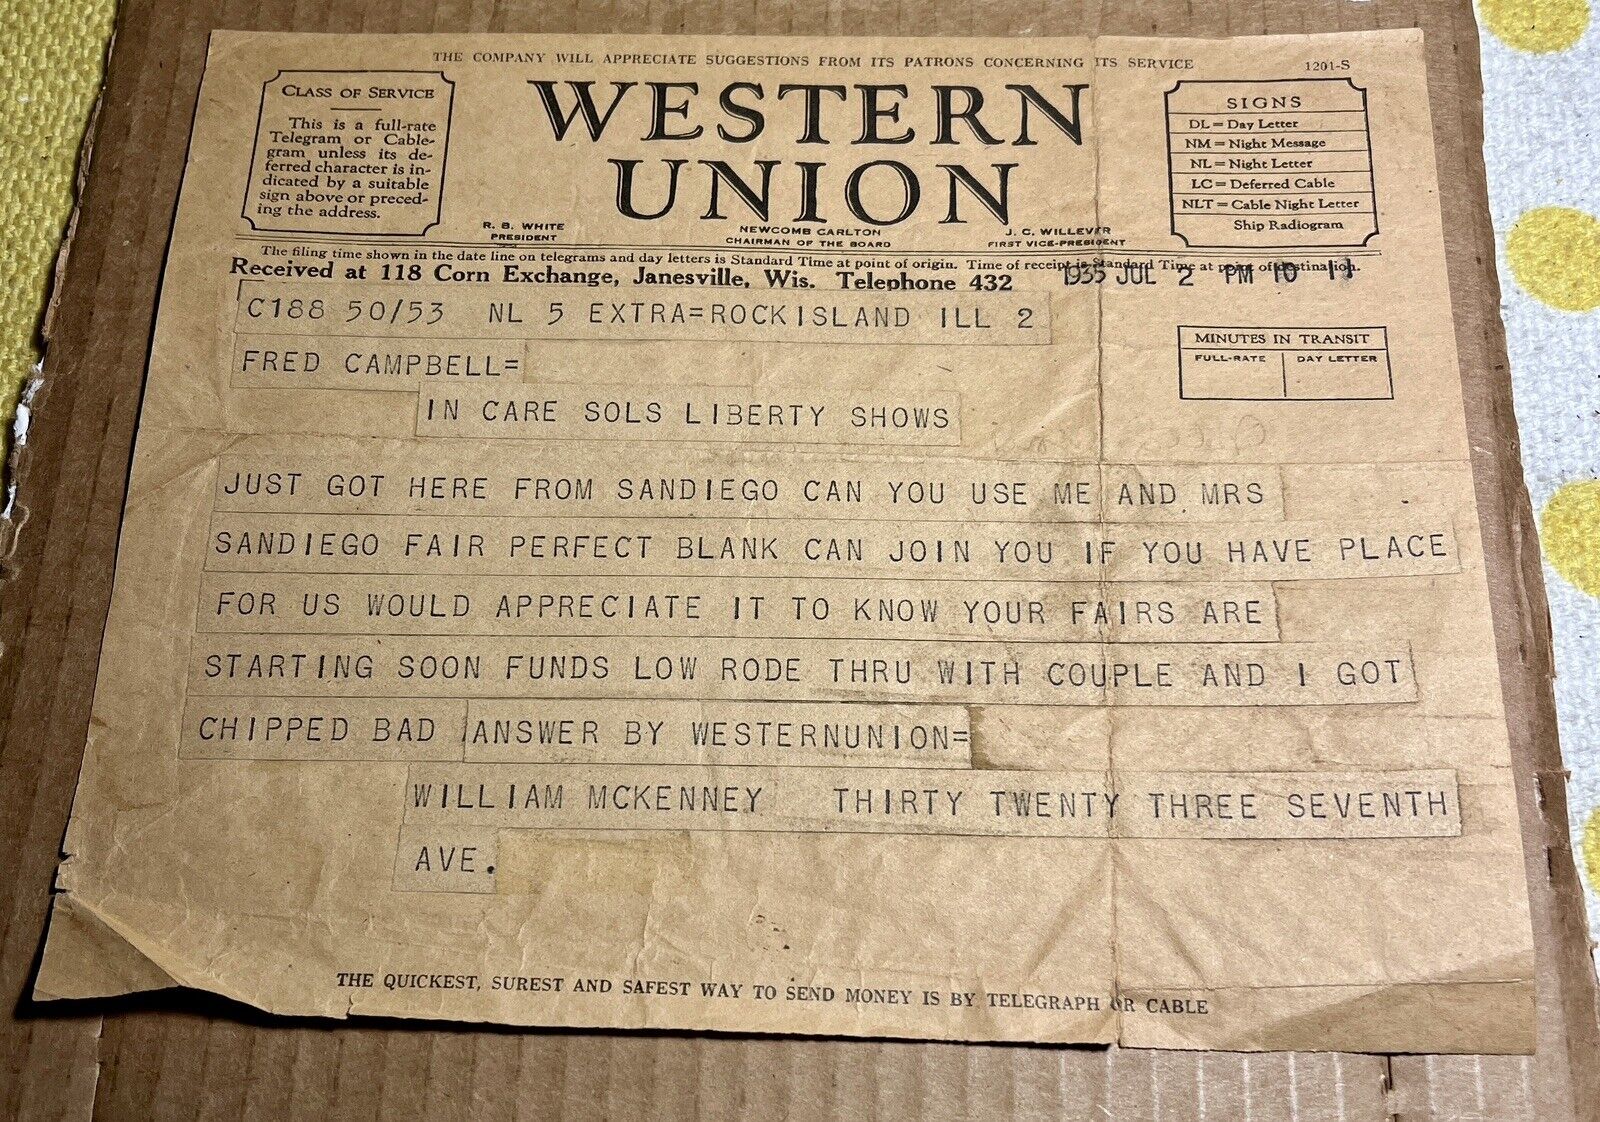 SCARCE 1935 WESTERN UNION TELEGRAM SOL’S LIBERTY SHOWS TRAVELING CARNIVAL WORK